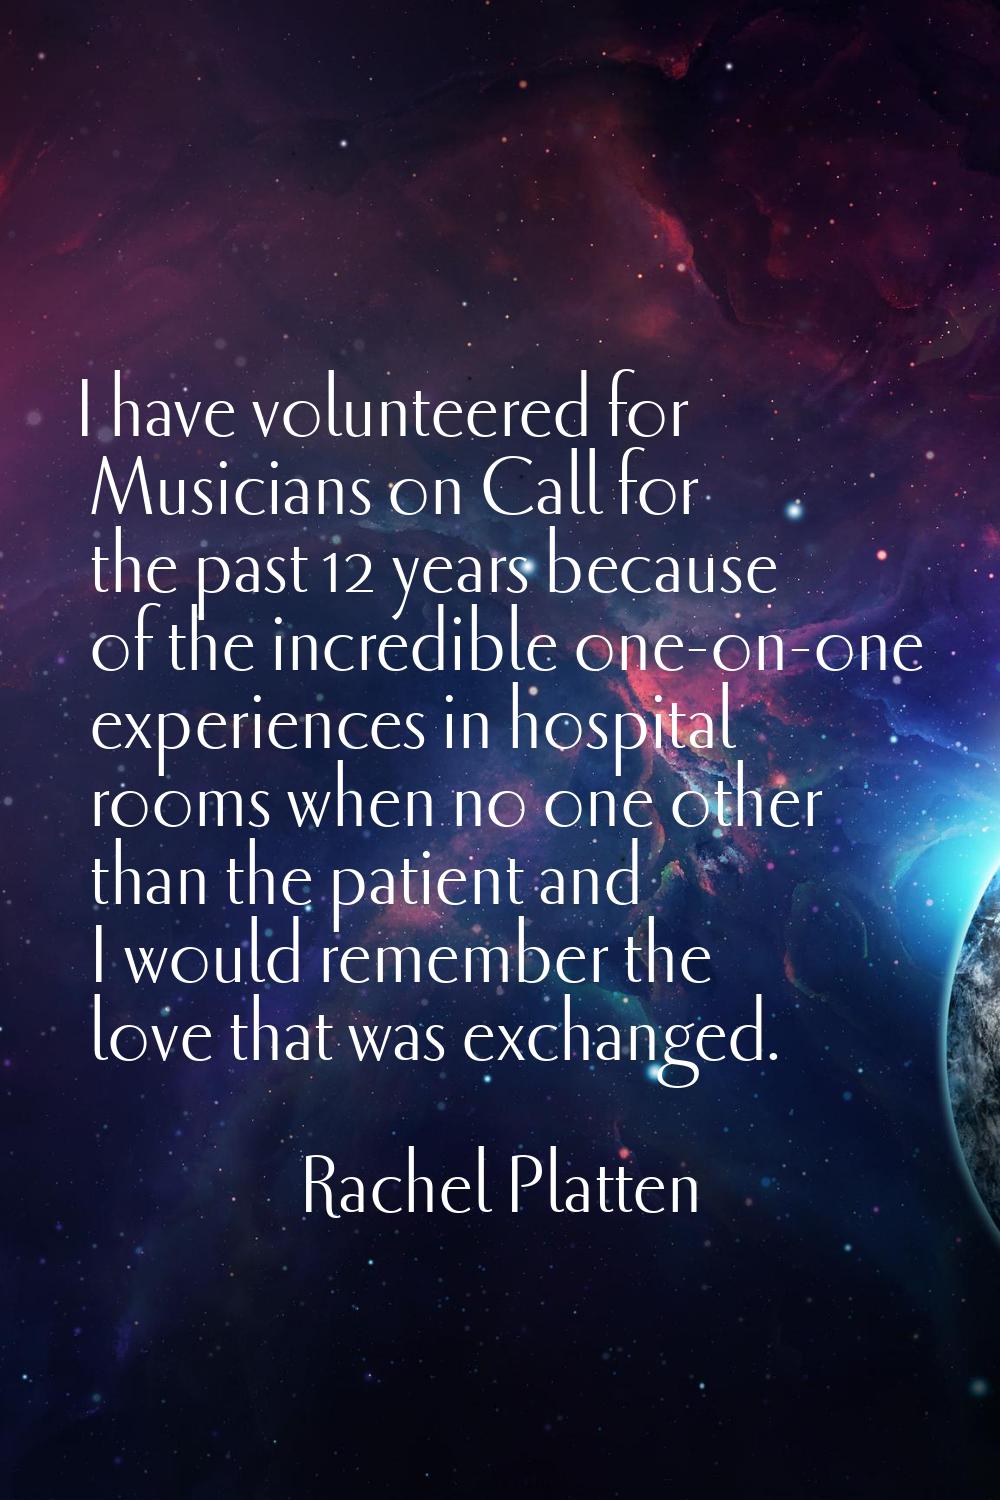 I have volunteered for Musicians on Call for the past 12 years because of the incredible one-on-one